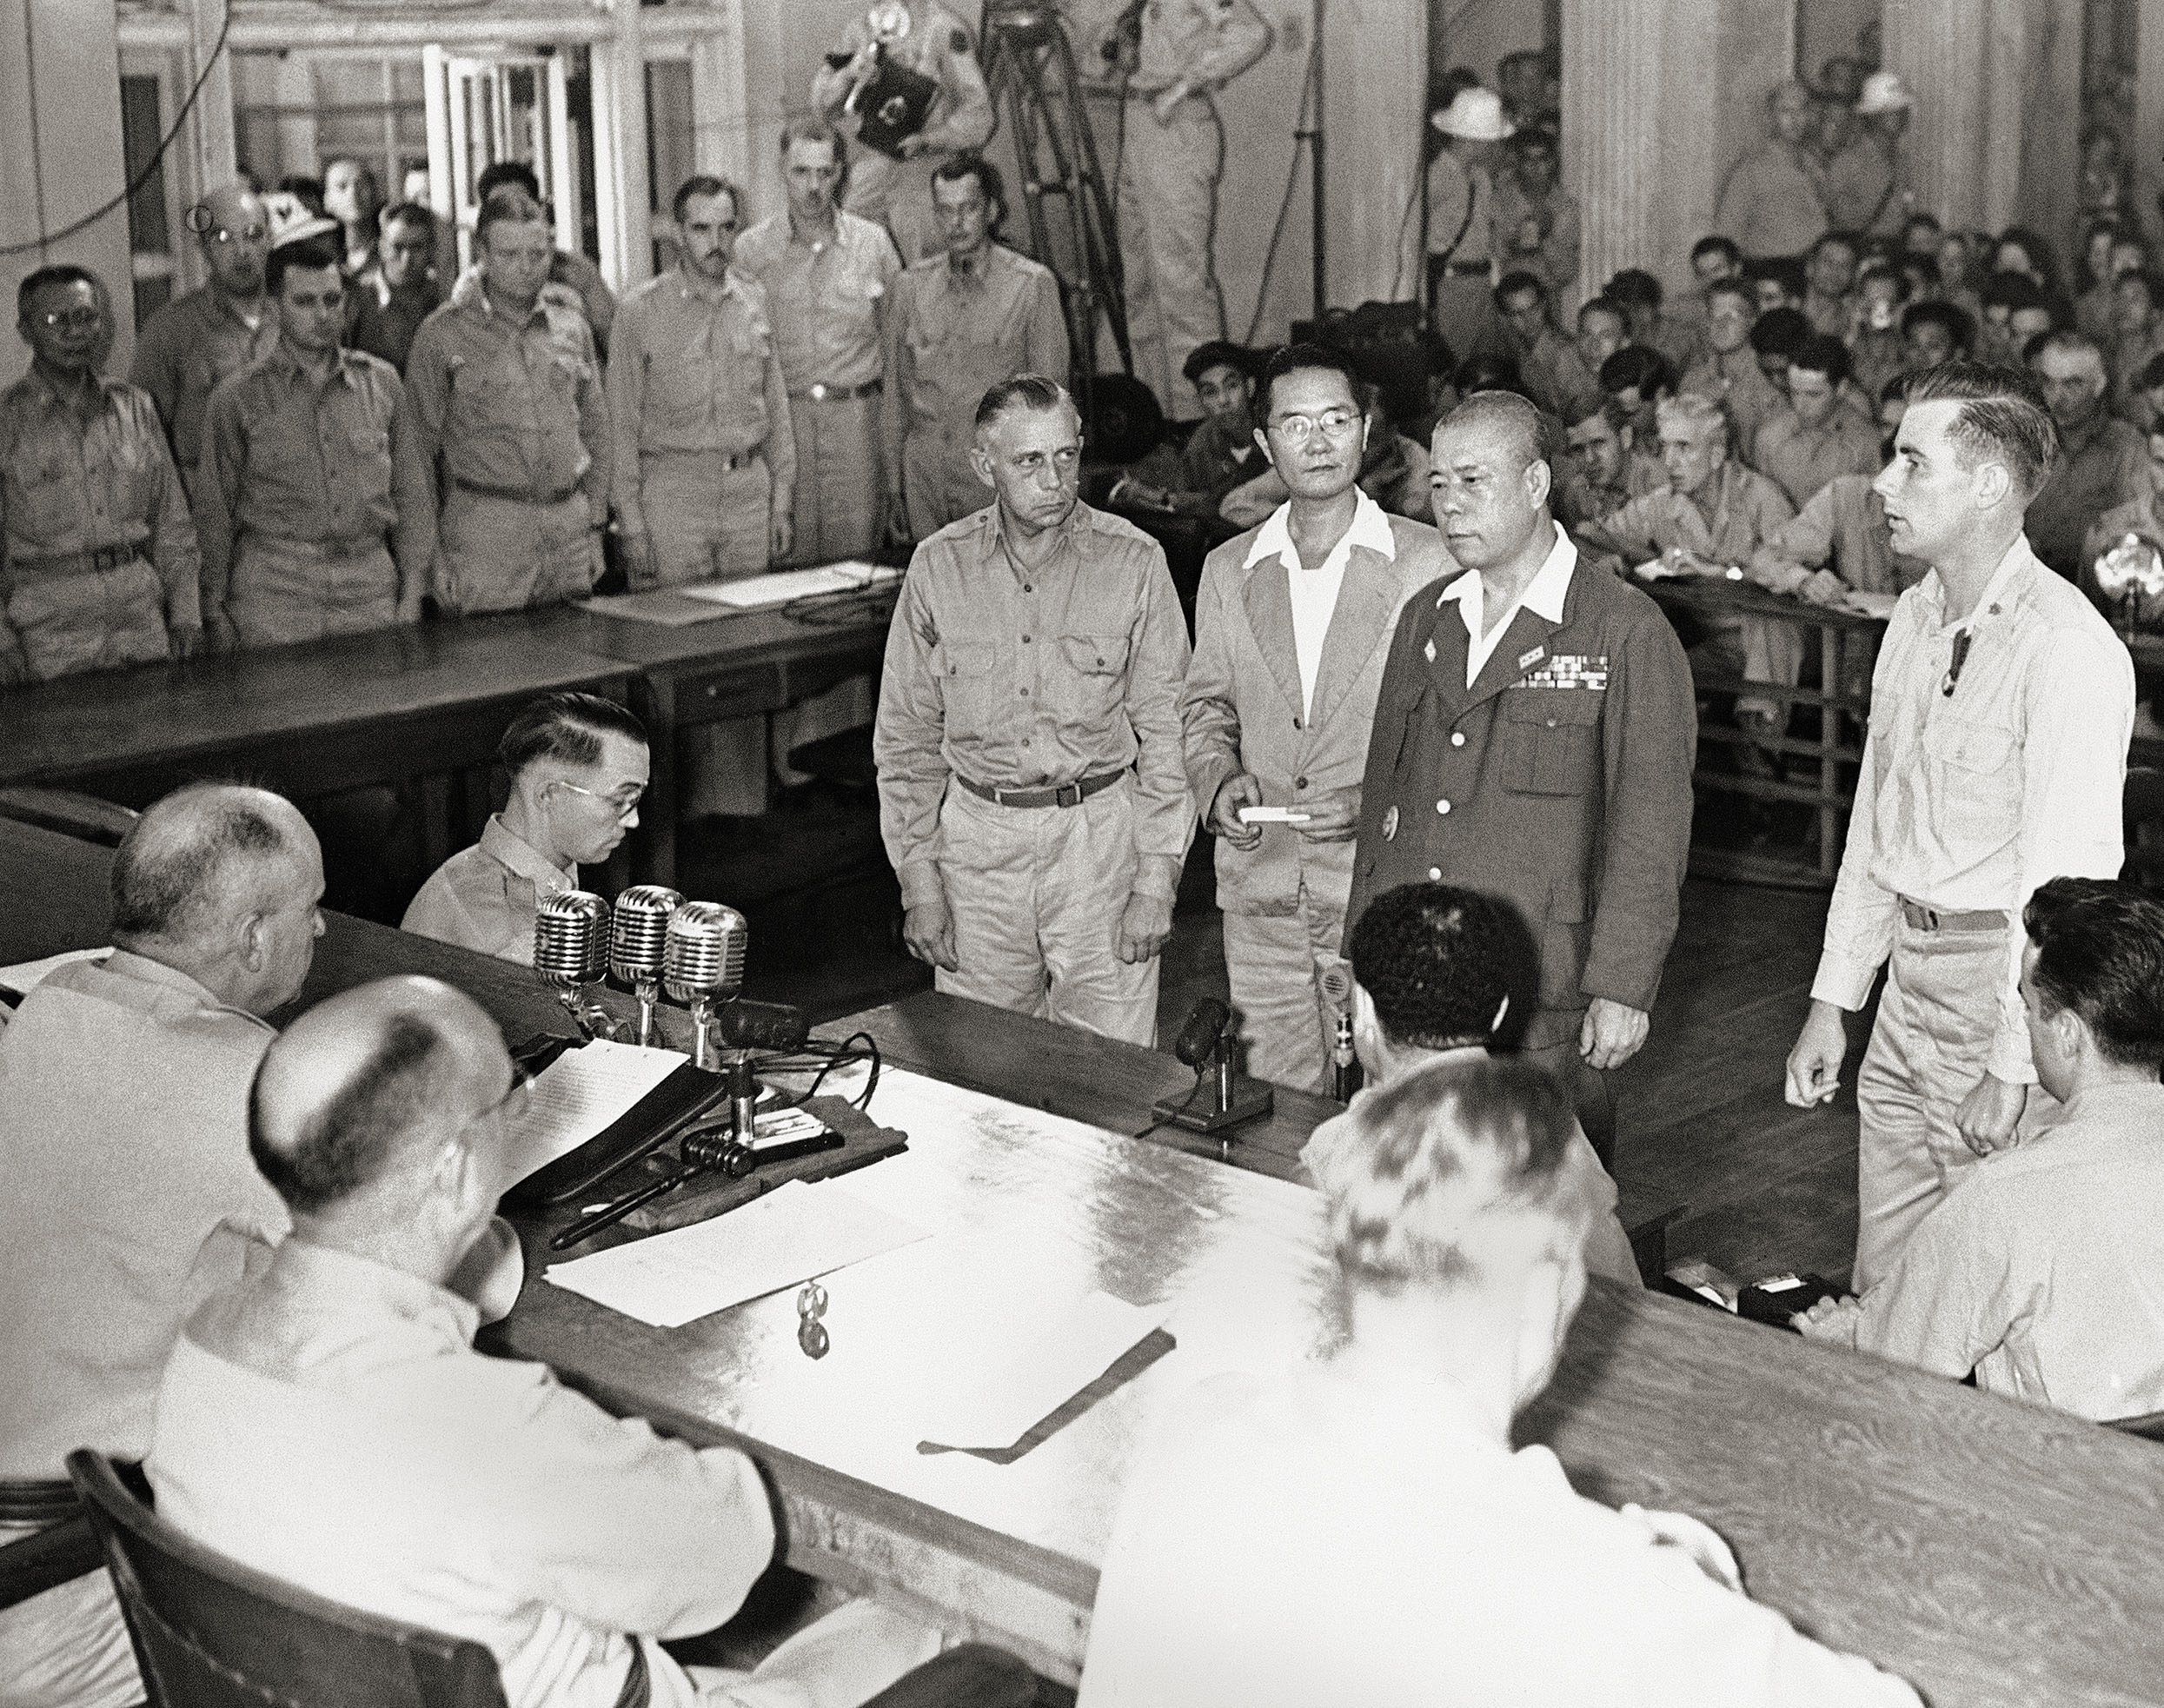 Pratt (at far right) stands beside Yamashita on Dec. 7, 1945, as the Japanese general is sentenced to death for atrocities committed by troops under his command. / AP